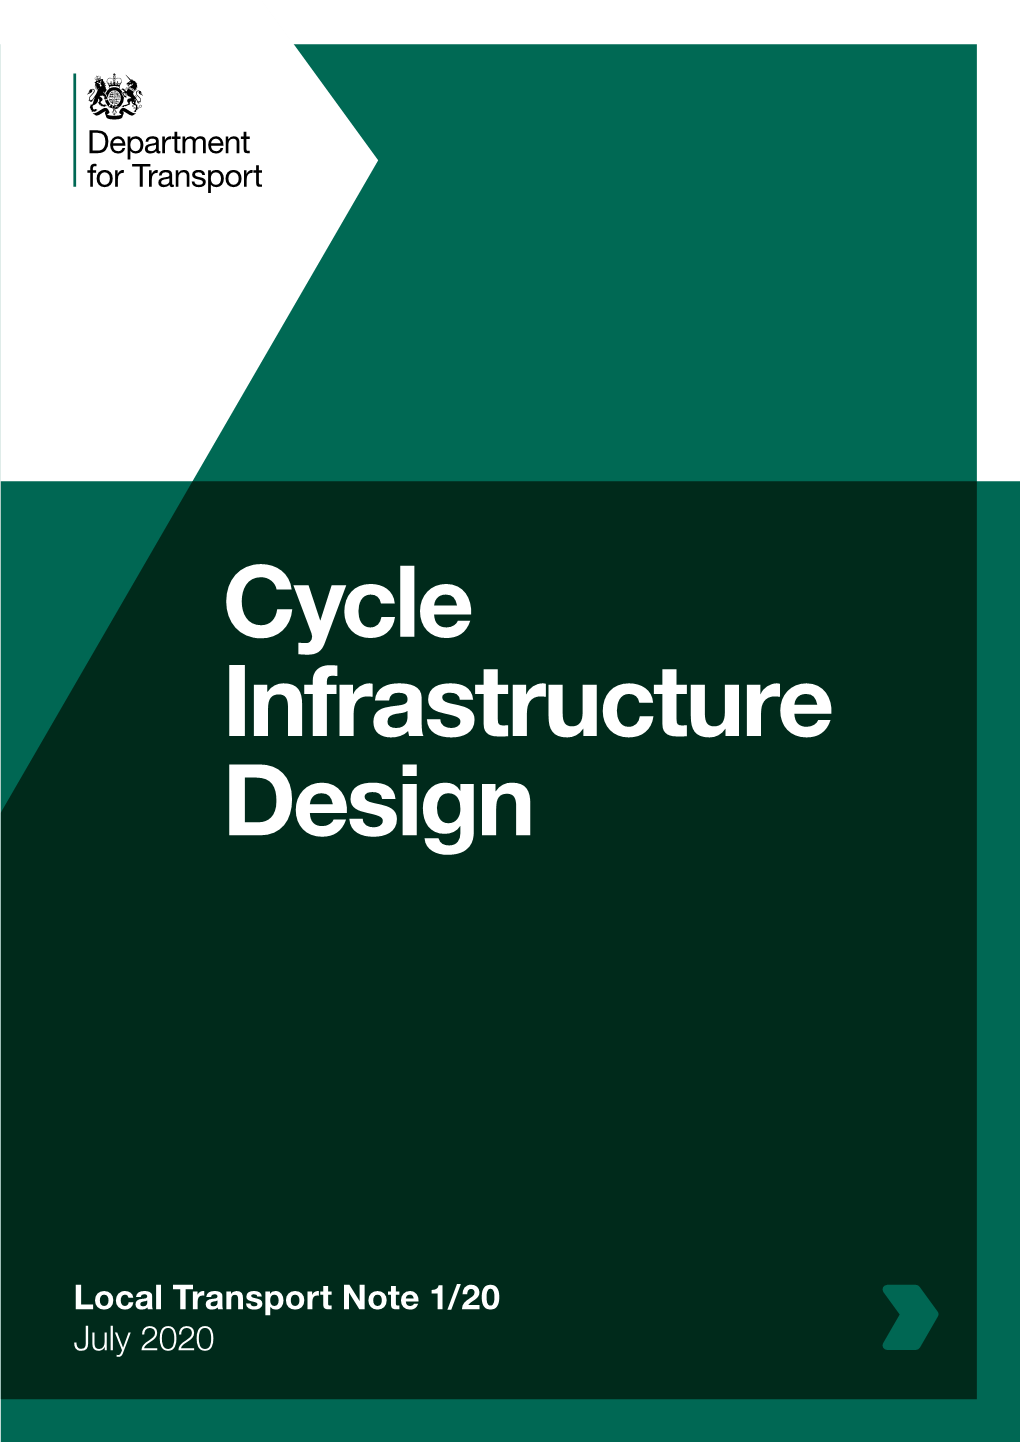 Cycle Infrastructure Design Guidance